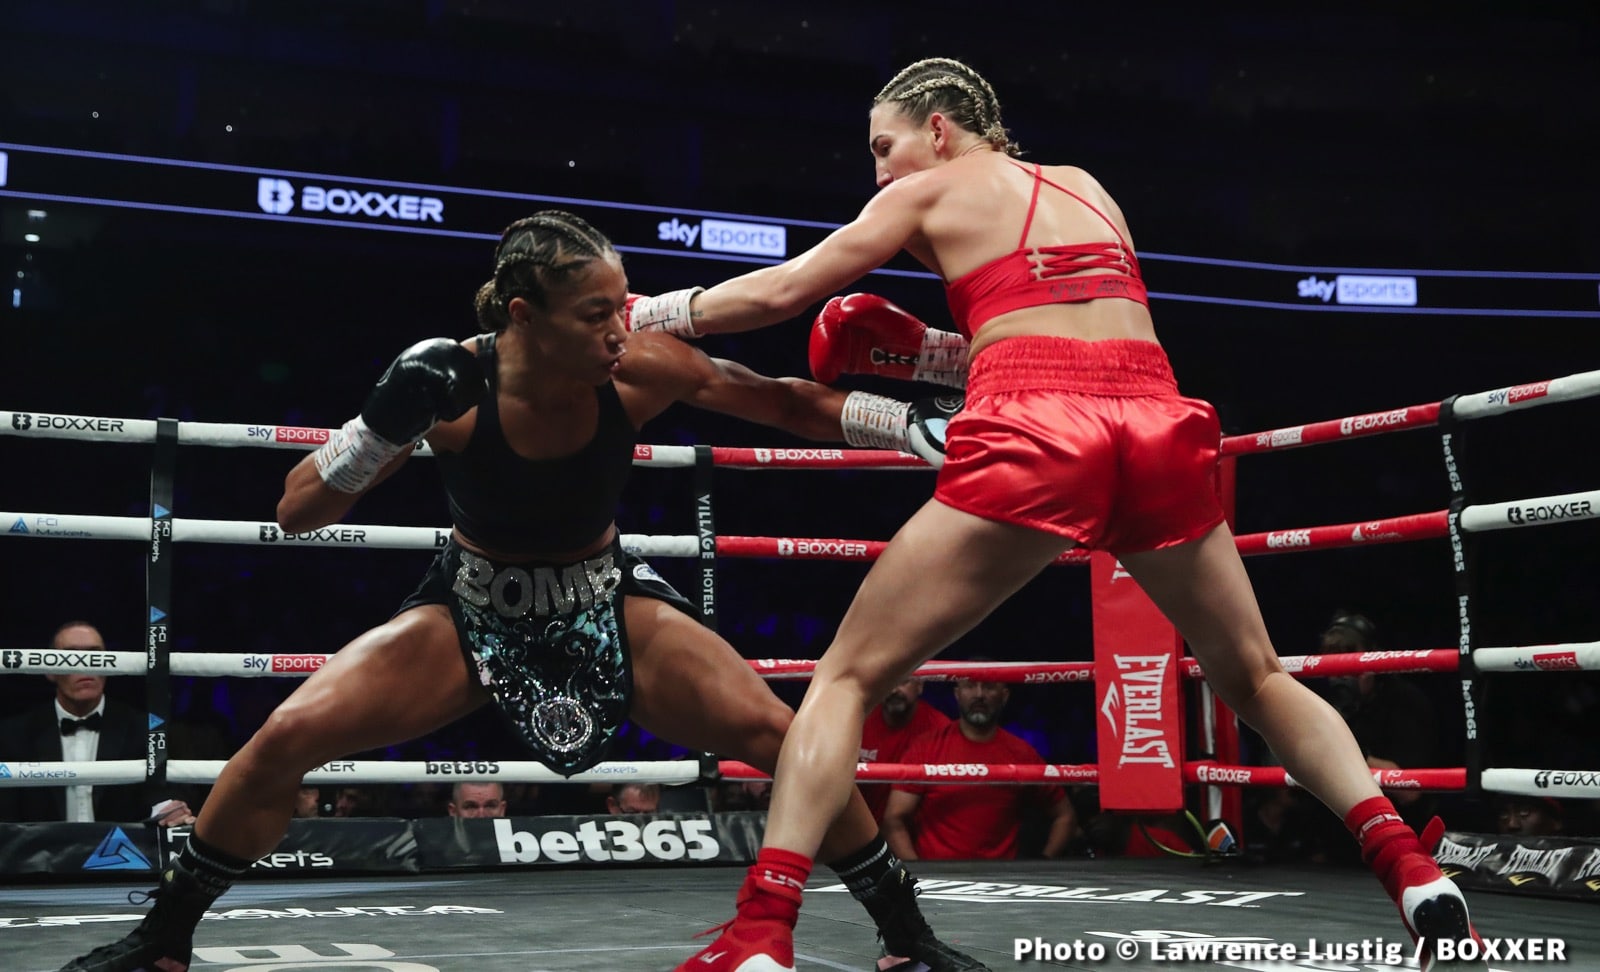 Image: Alycia Baumgardner Wins Unification Match And Now She's Focused On Becoming Undisputed